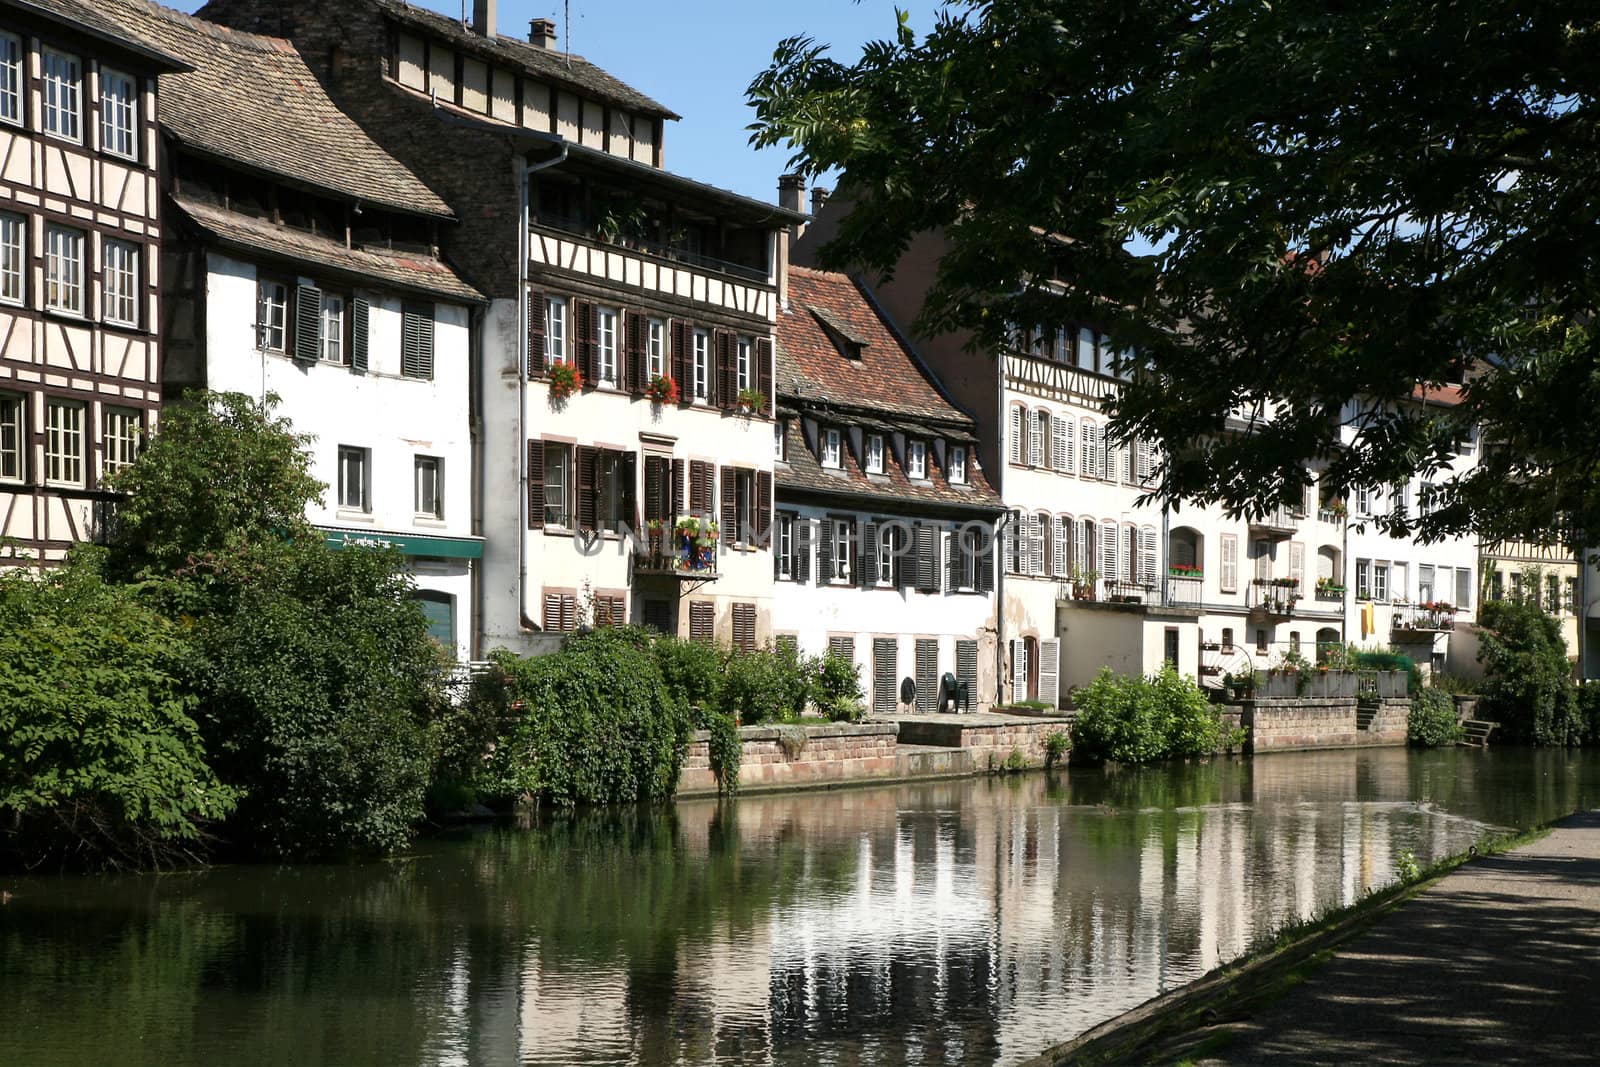 Picturesque Petite France in Strasbourg - France